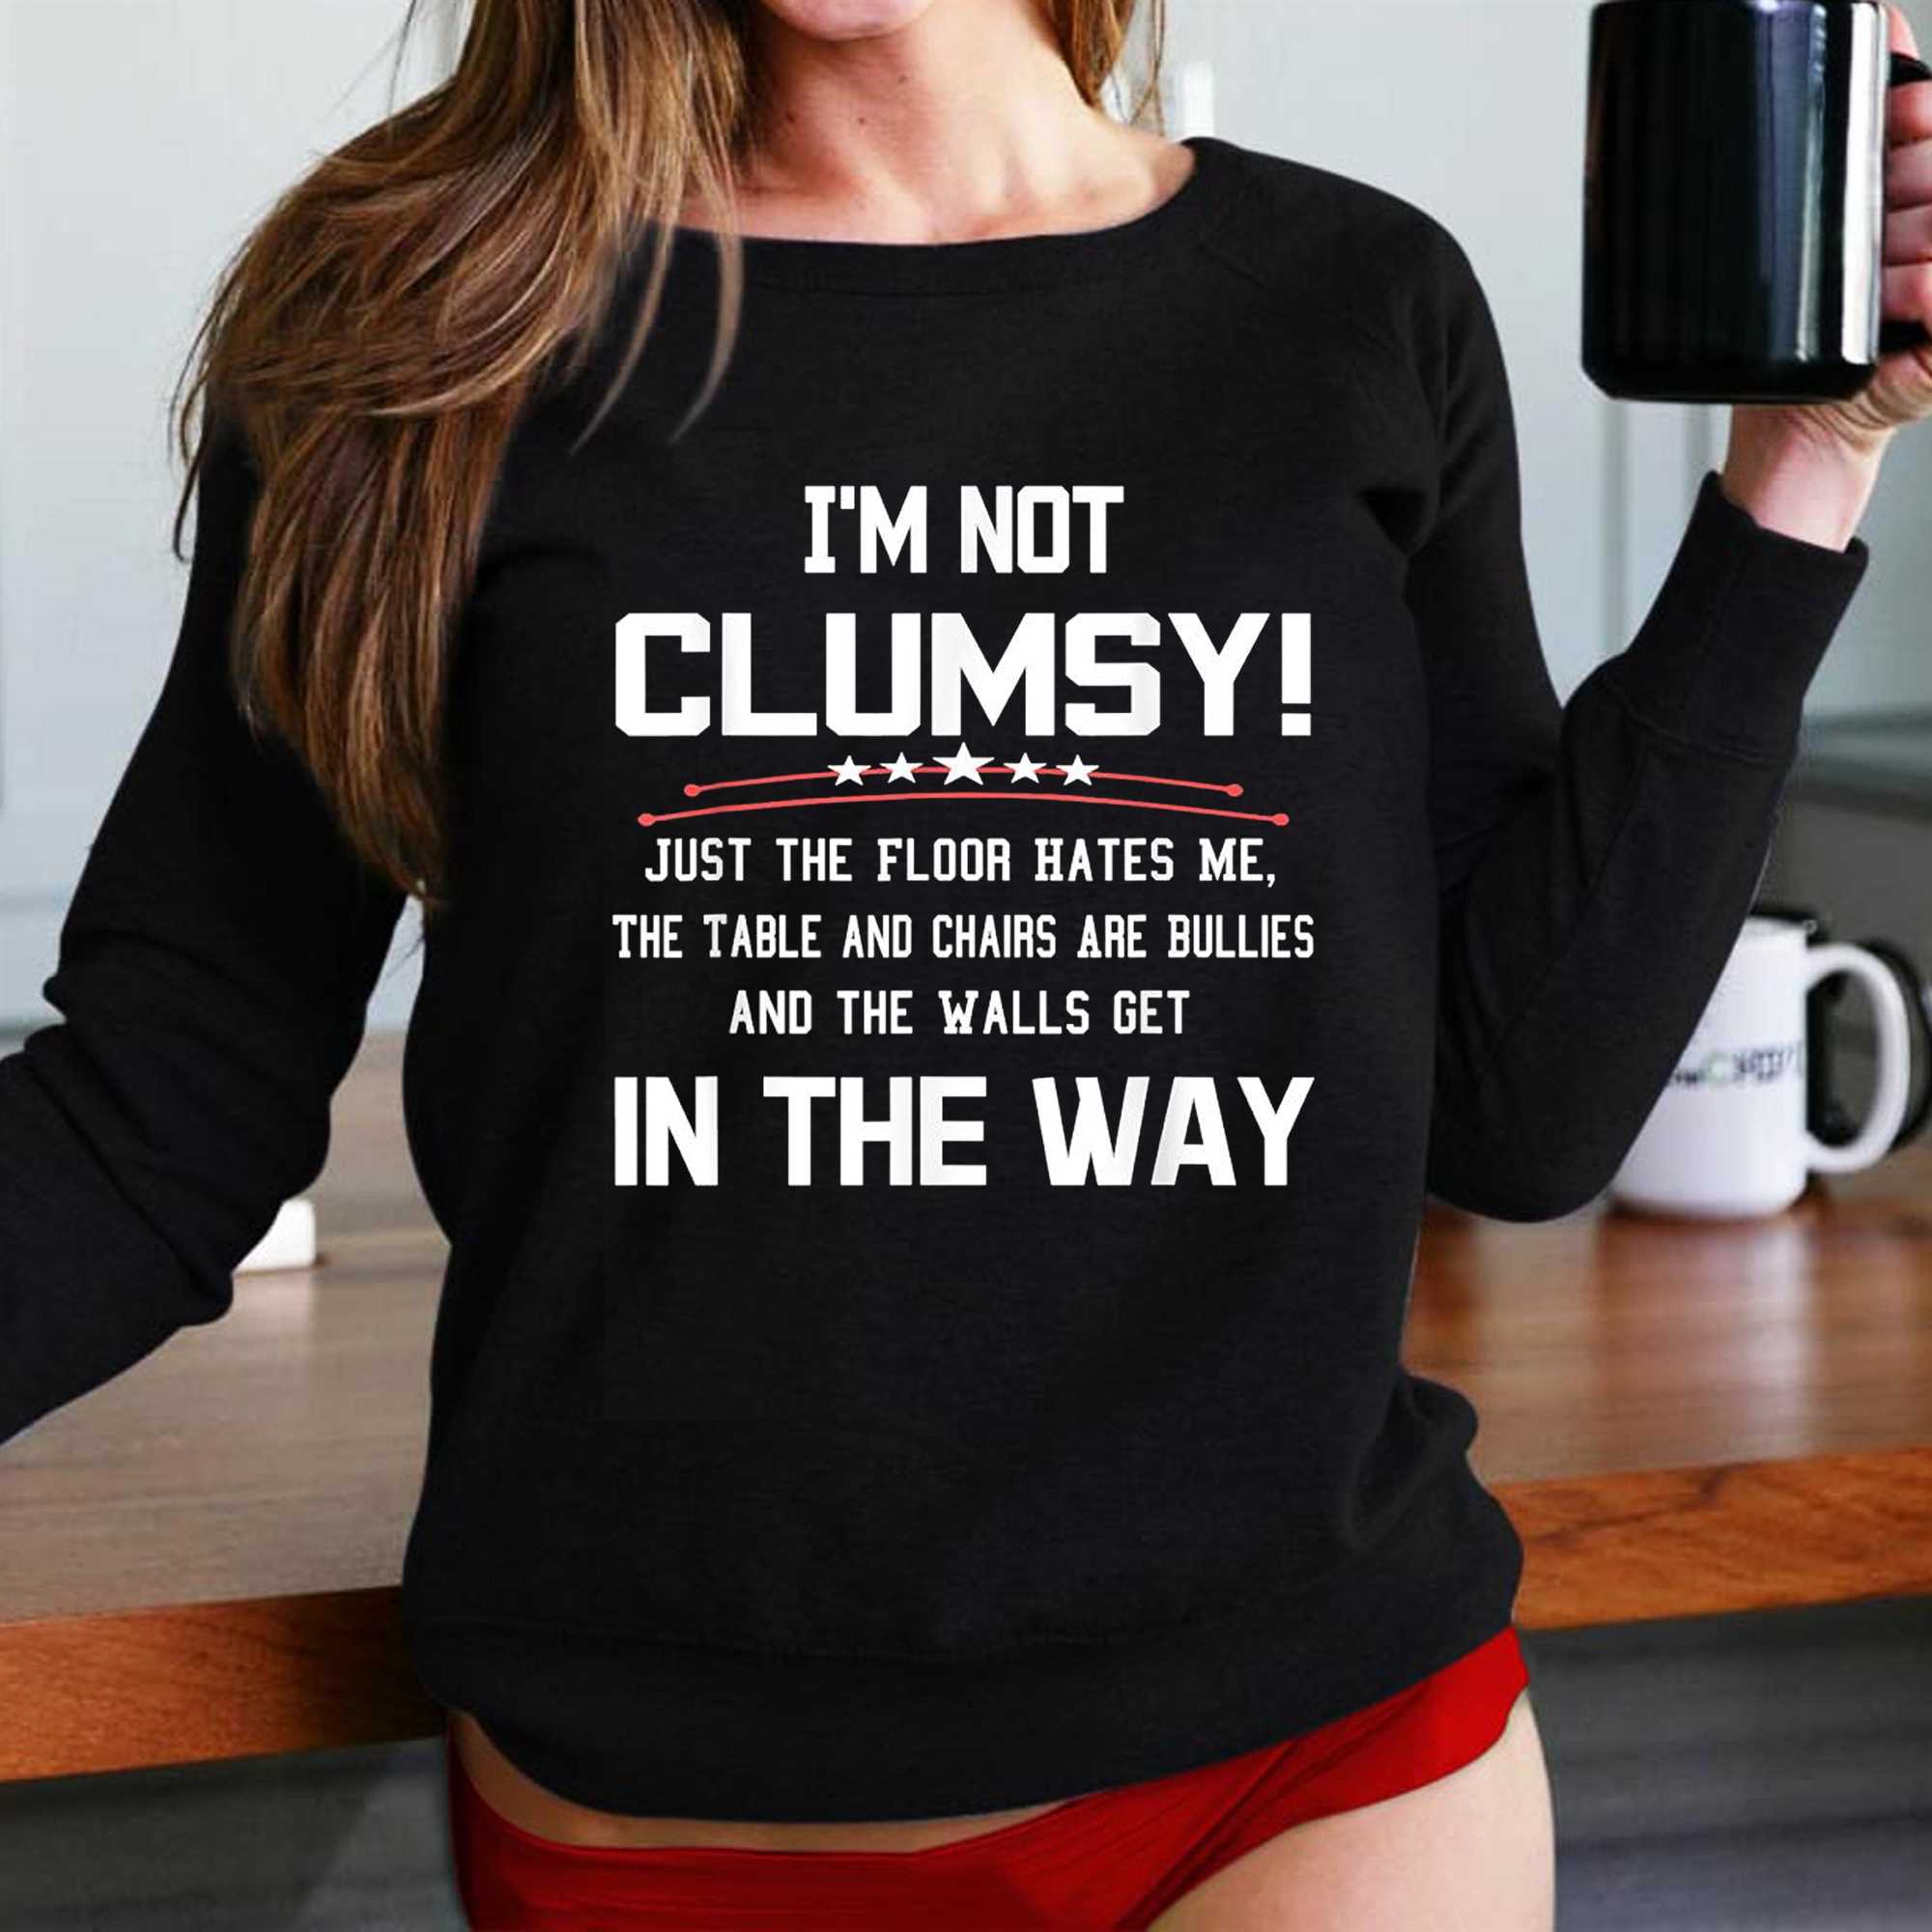 Im Not Clumsy Sarcastic Funny Saying T-shirt - Shibtee Clothing